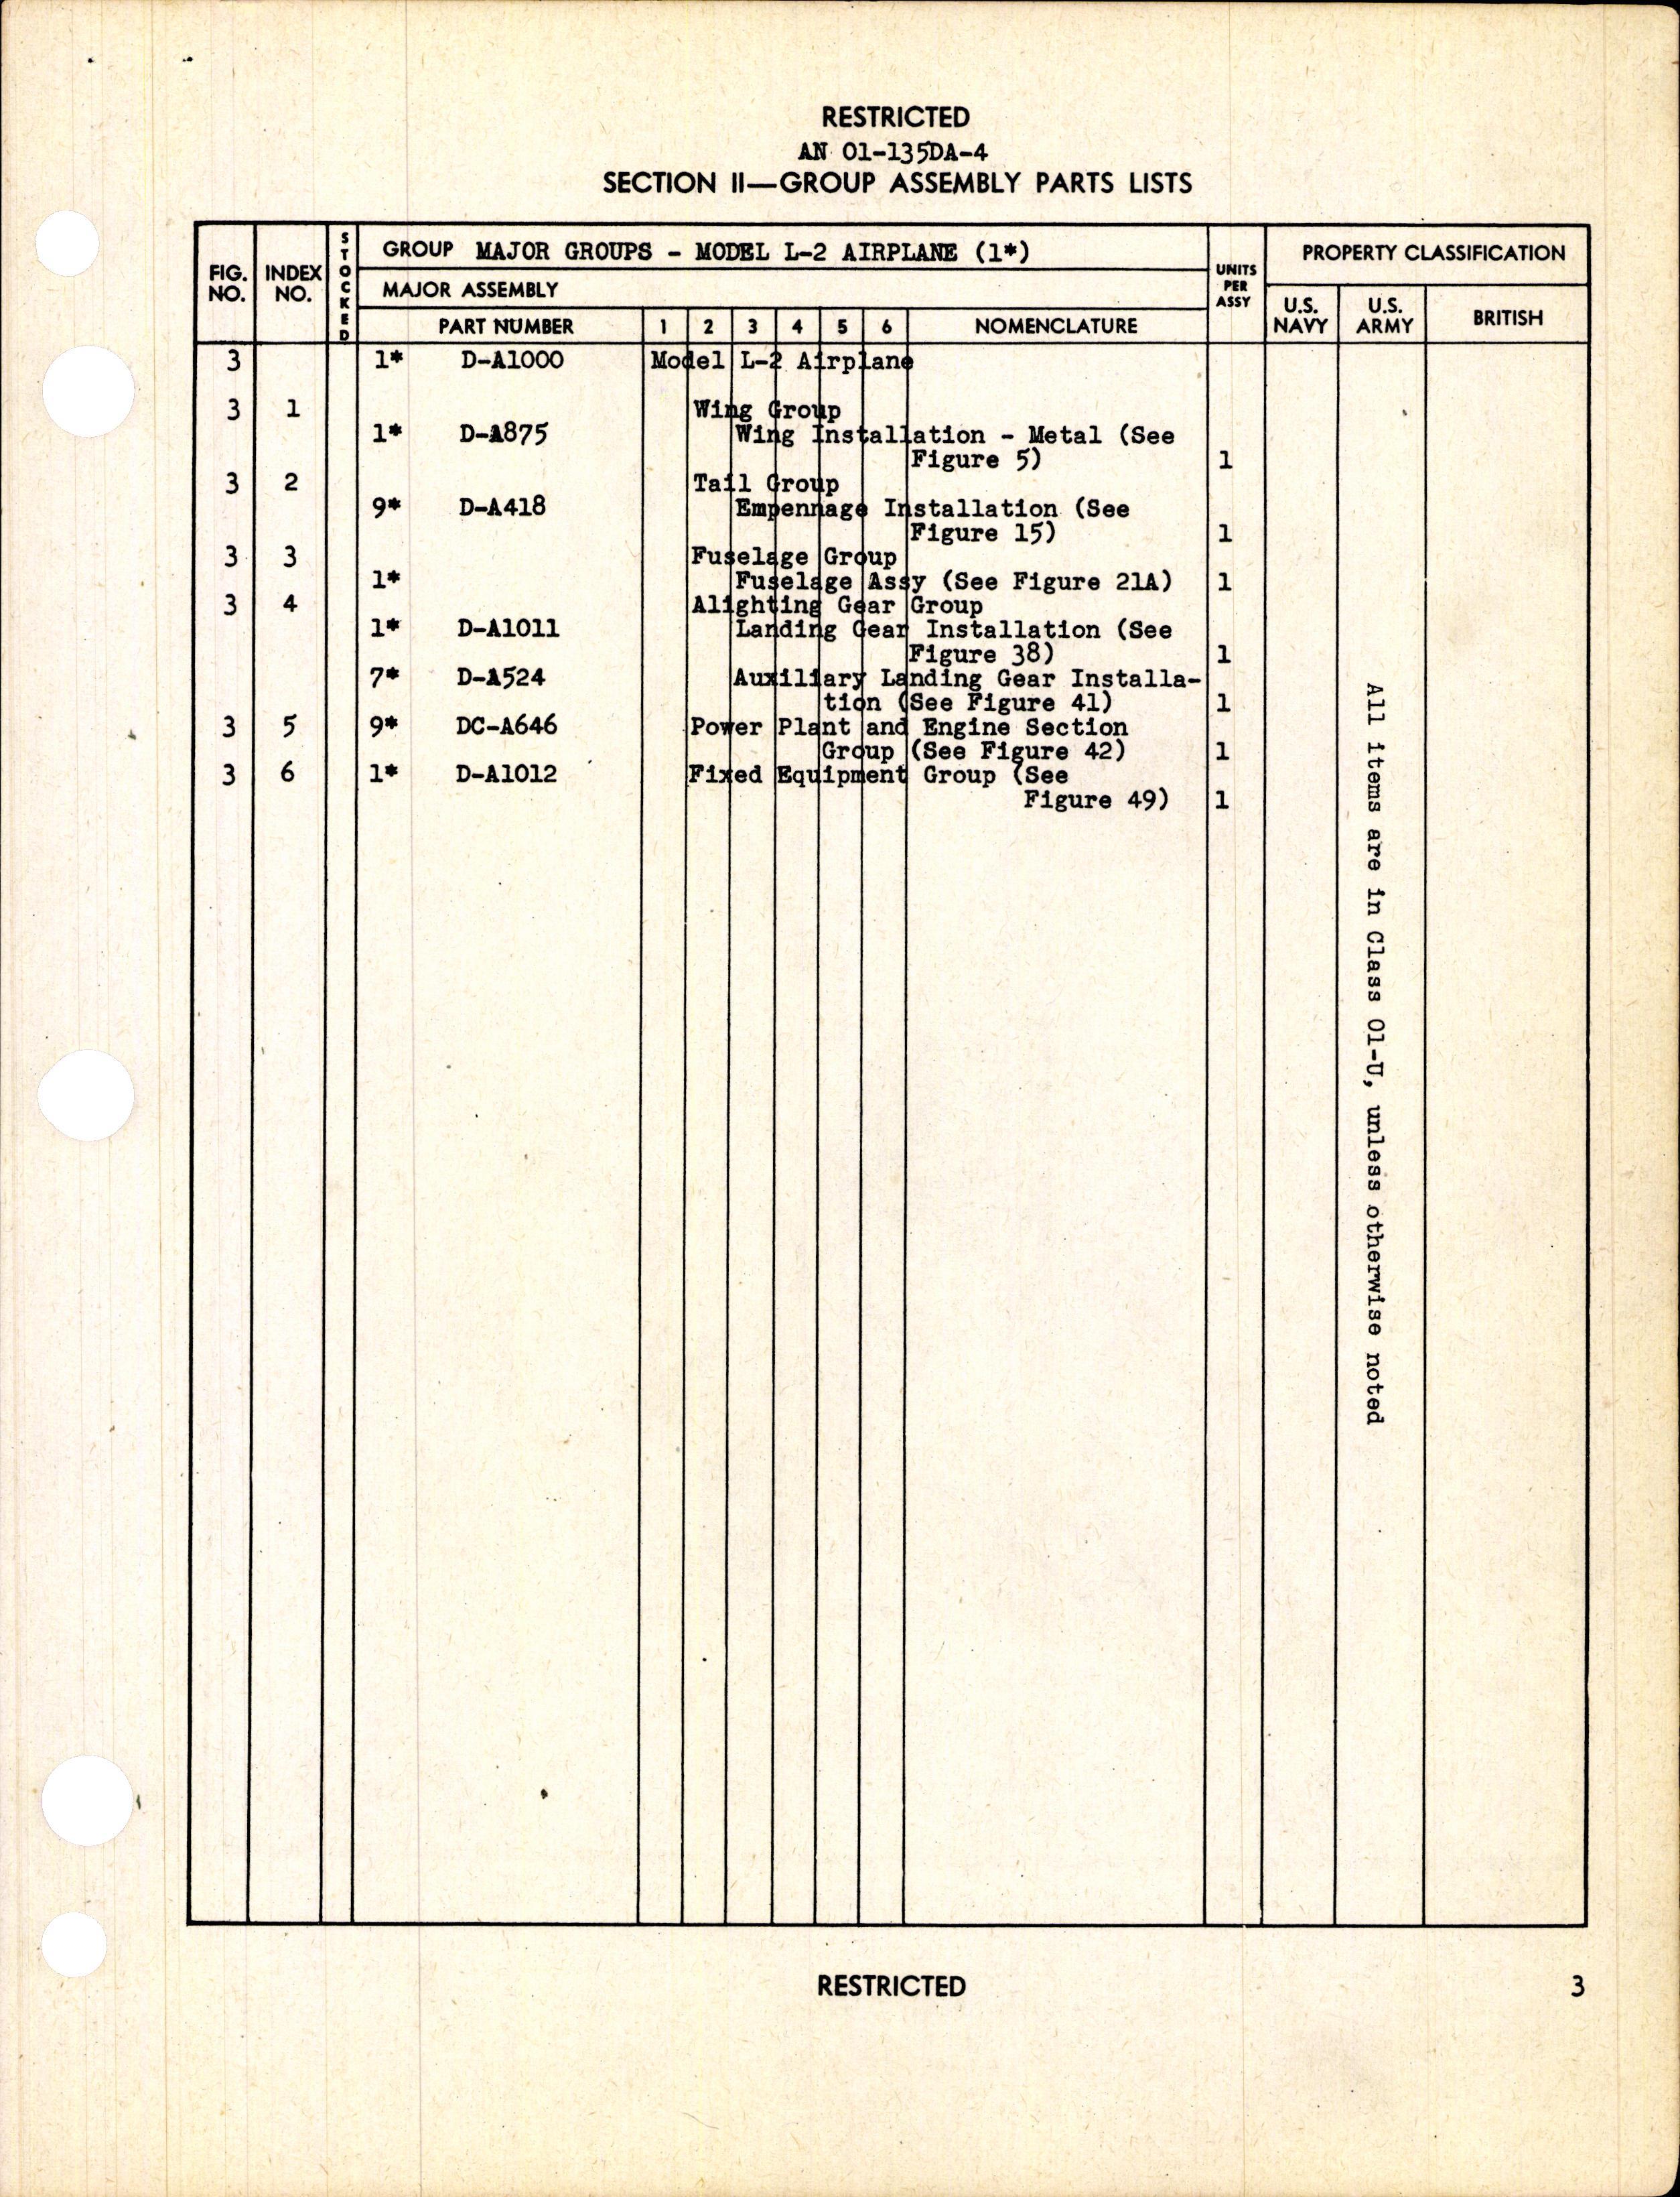 Sample page 7 from AirCorps Library document: Parts Catalog for L-2, L-2A, and L-2B Airplanes